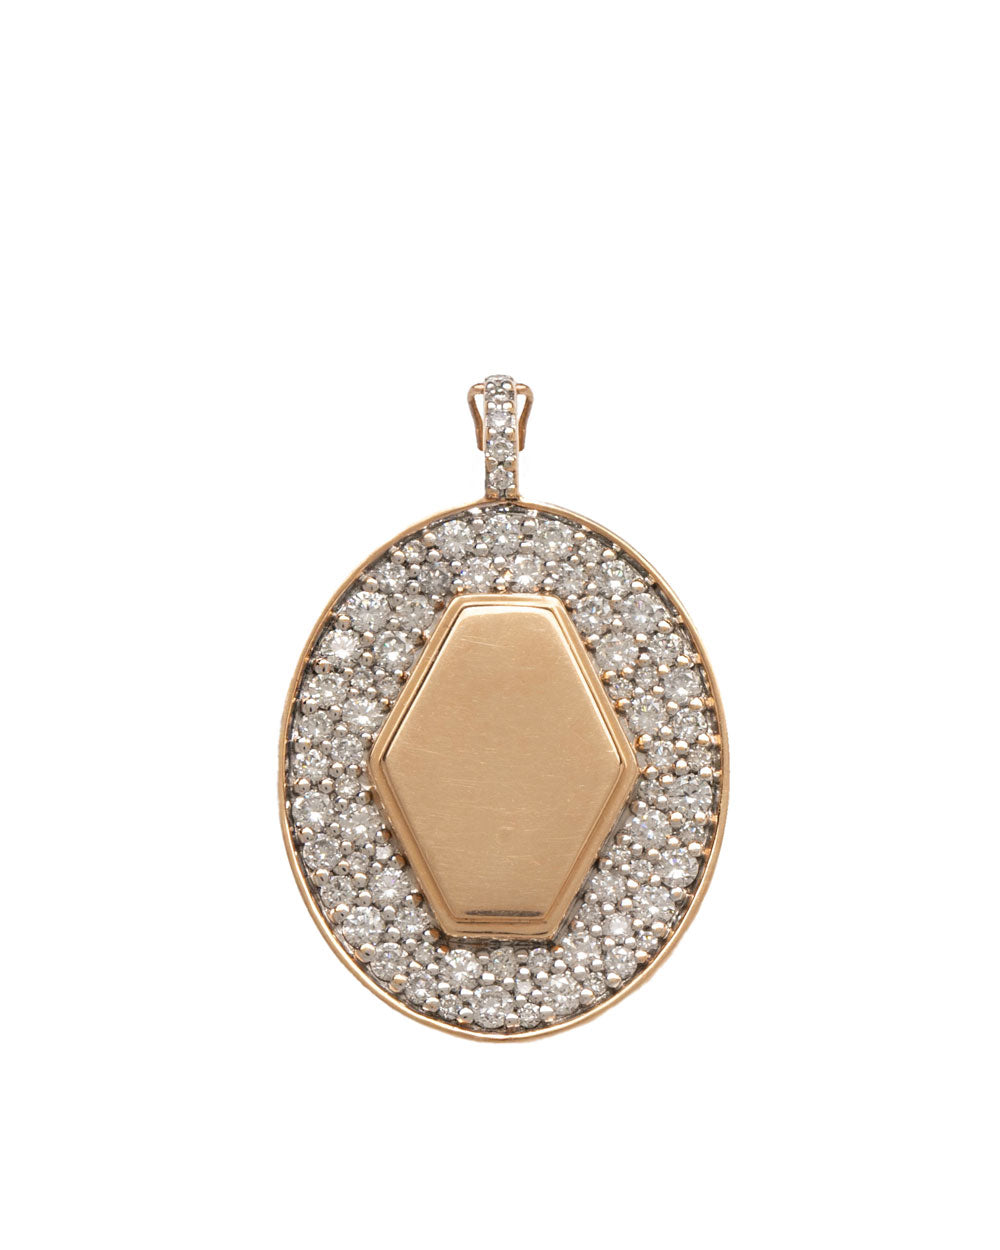 18k Rose Gold Pendant with White Diamonds and Signature Hexagon Charm